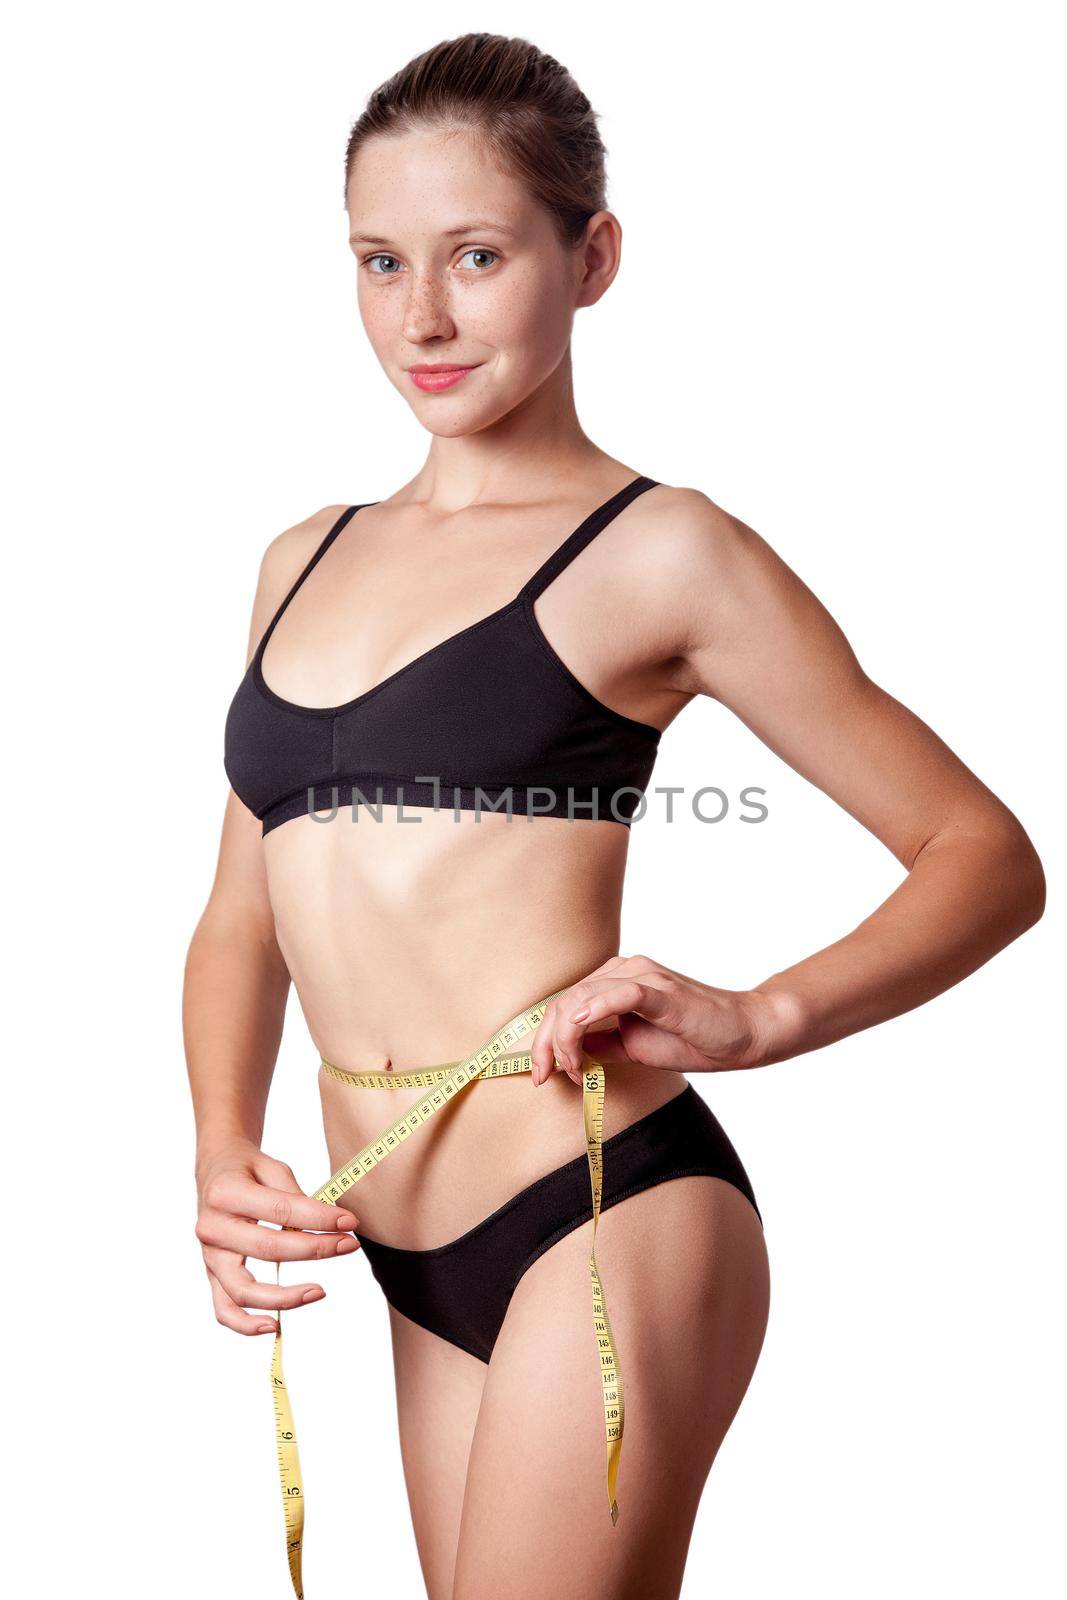 Slim fit happy young woman with measure tape measuring her waist with black underwear by Khosro1